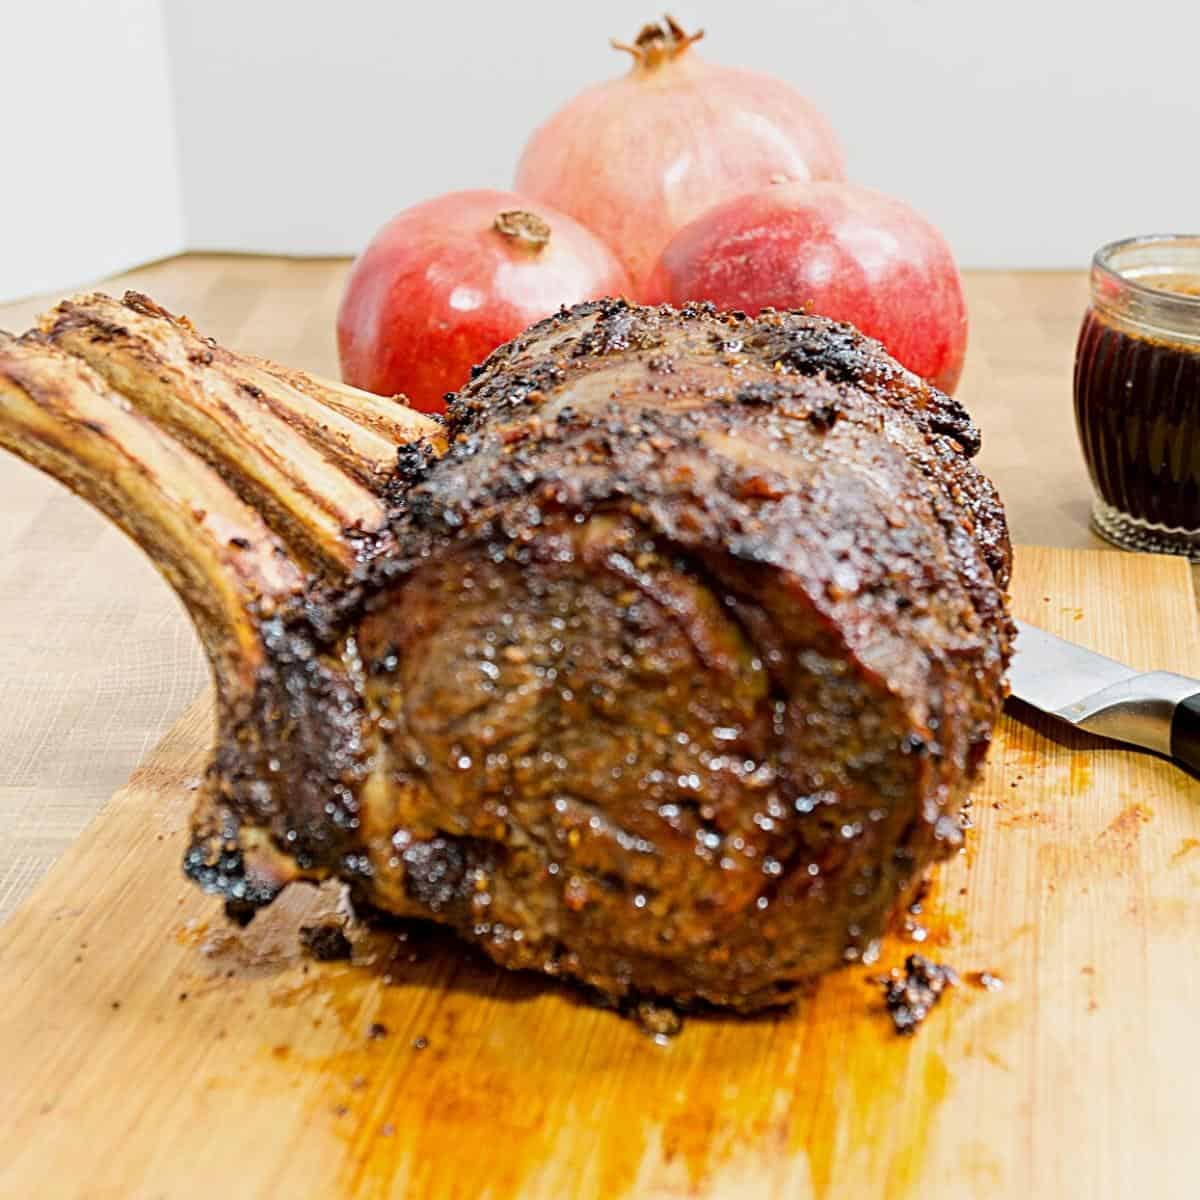 A roasted prime rib on a wooden board.